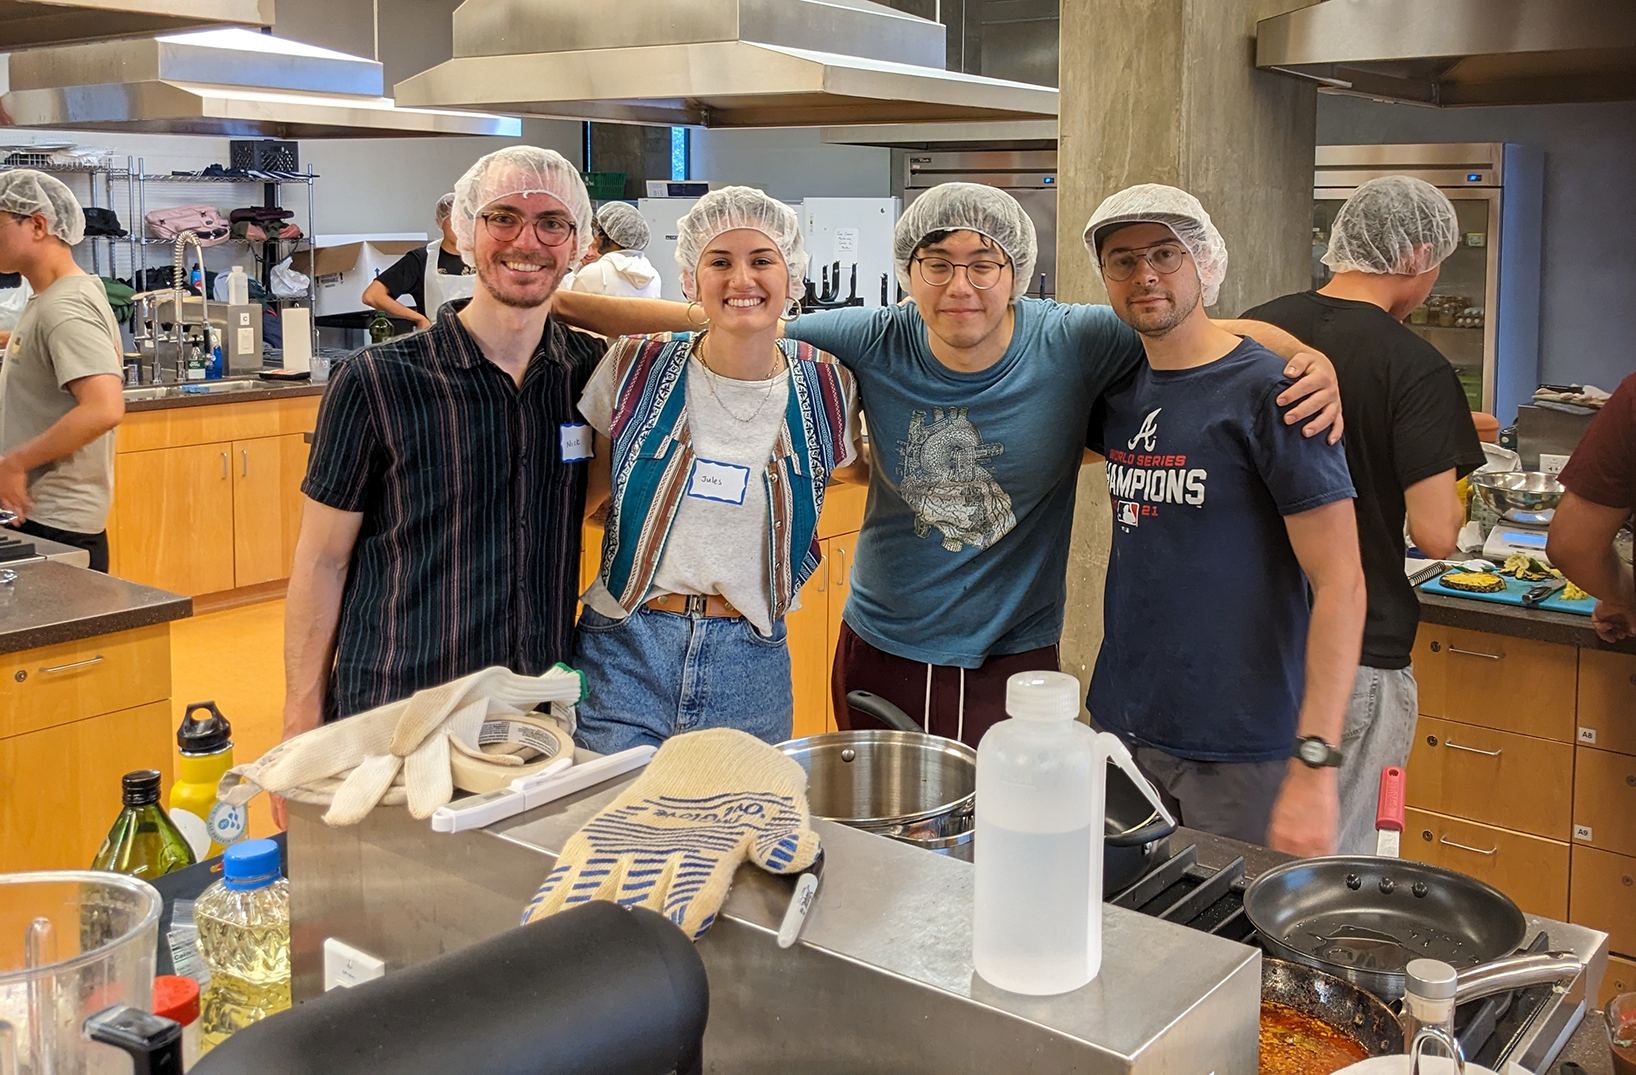 The winning team that made quesabirria tacos with seitan. (L-R) Nick Johnson, Jules Madigan, J.W. Roh and Austin Lourie.